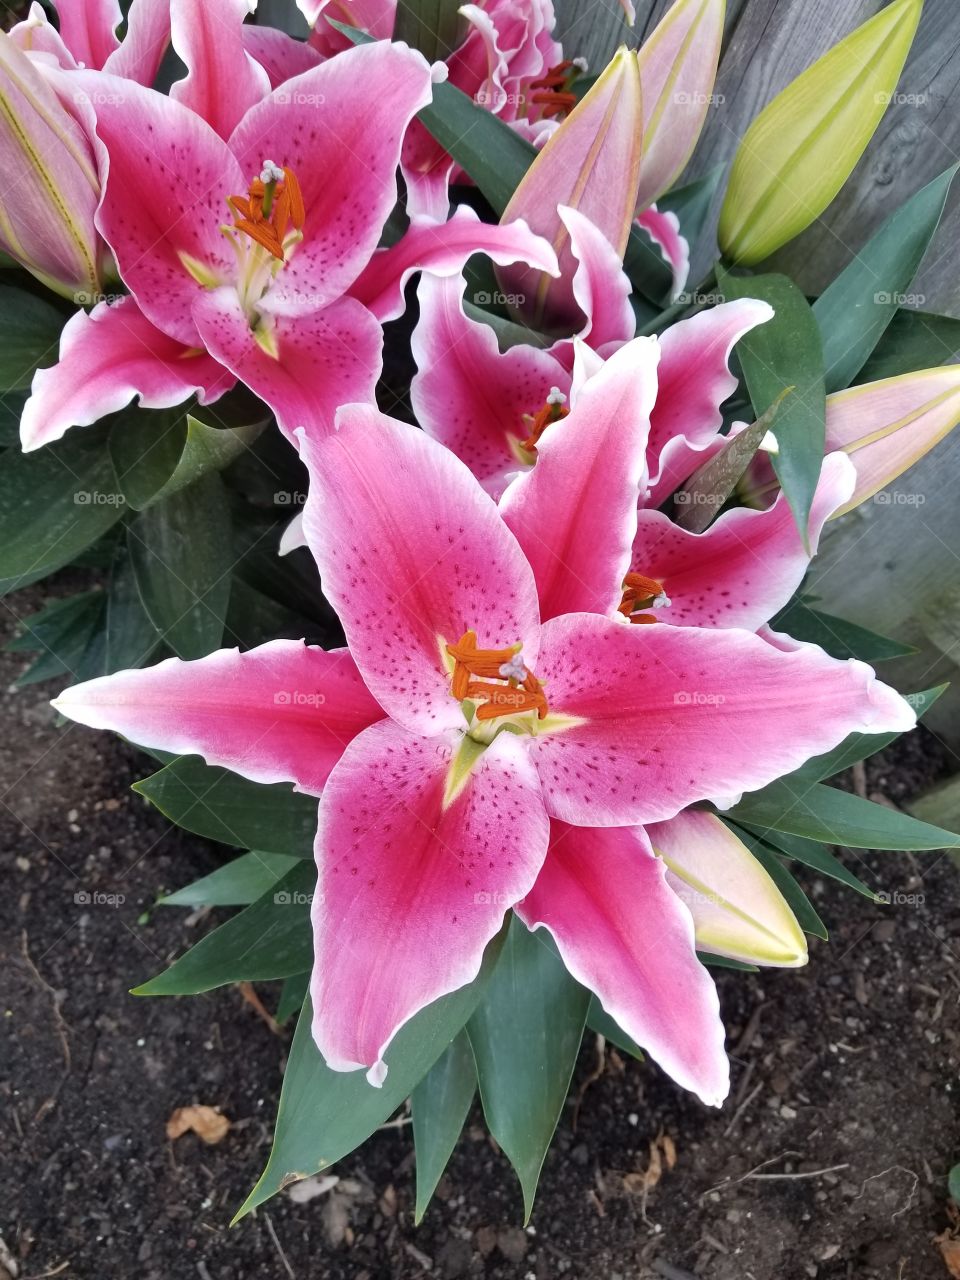 Hot pink lily